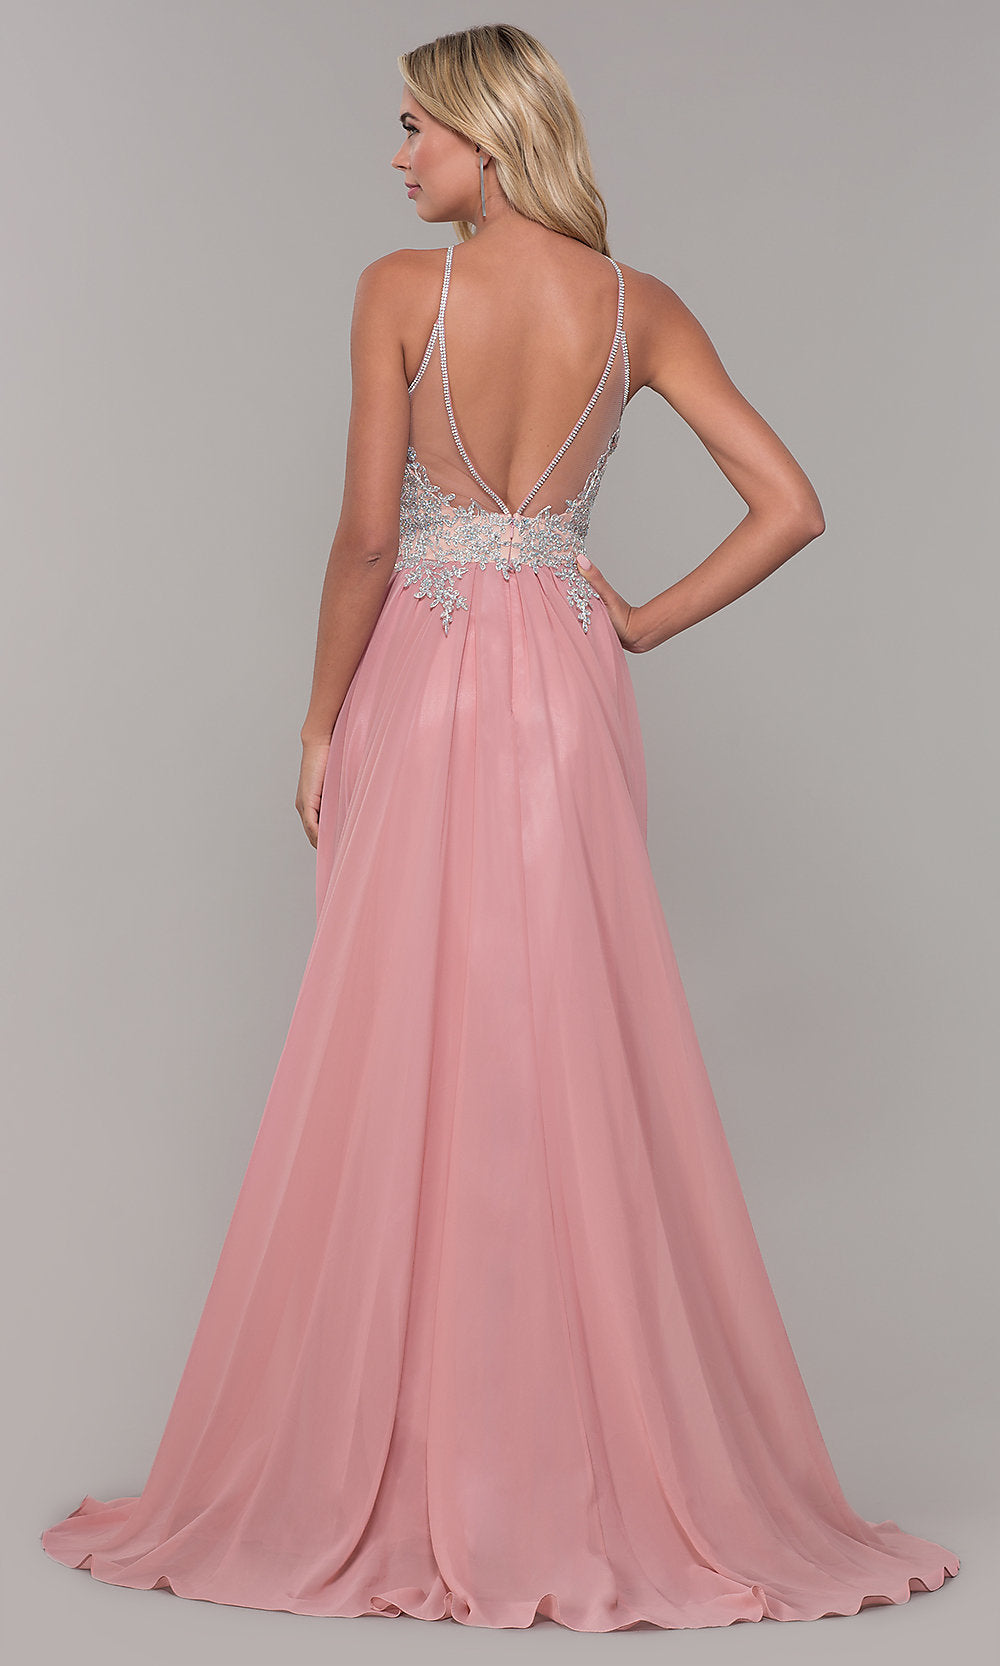 High-Neck Long Prom Dress with Front Keyhole Cut Out